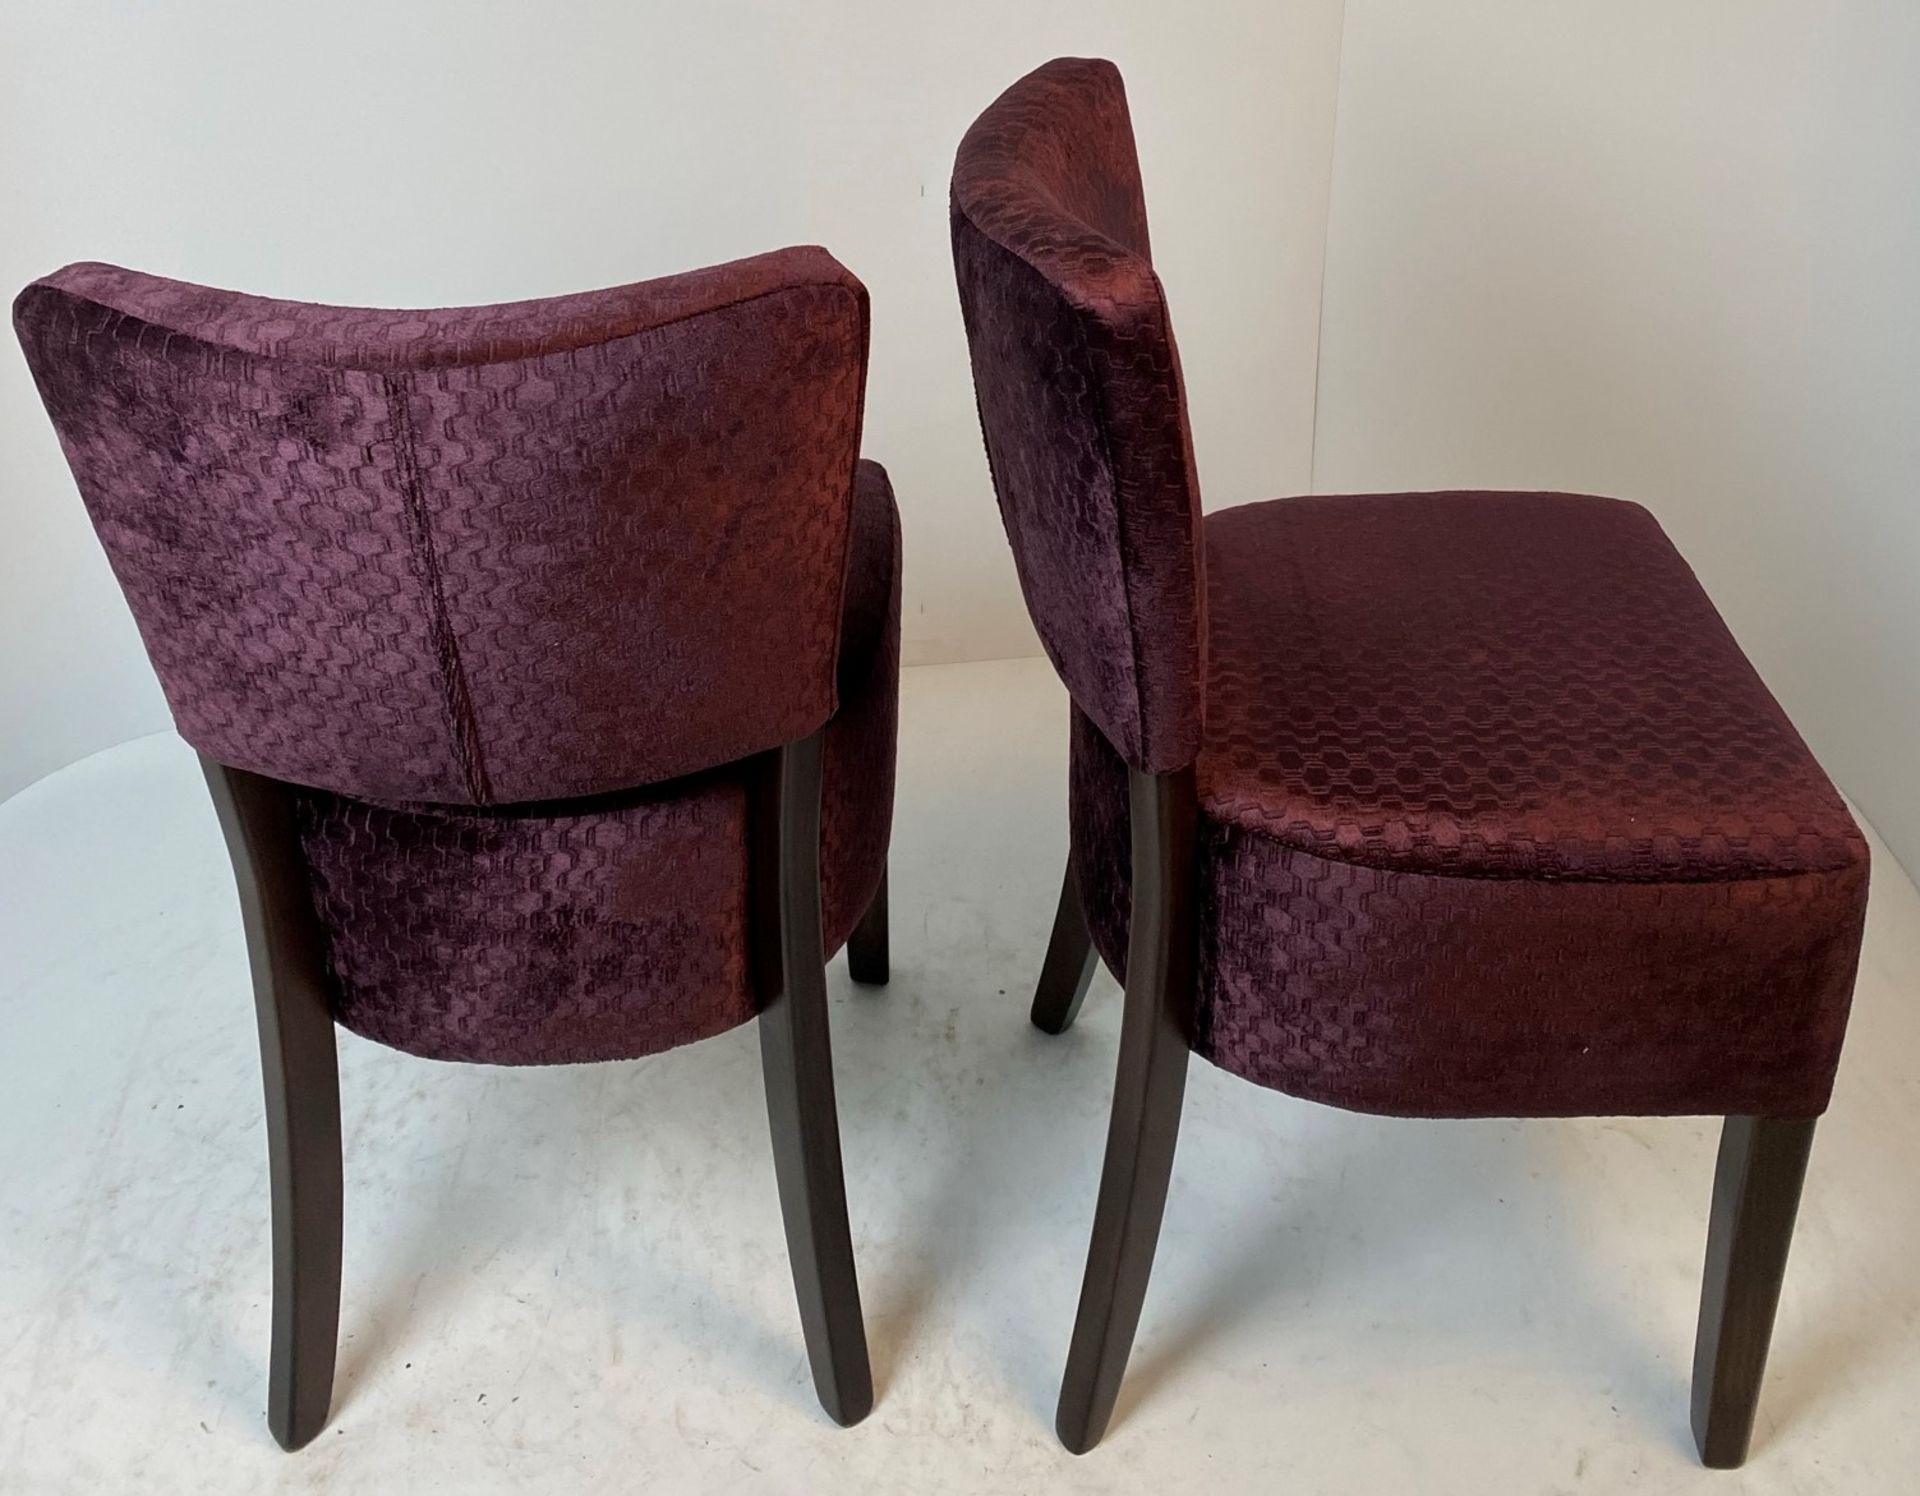 2 x Memphis Panaz Jewel 406 Claret side/dining chairs with walnut coloured frames - Image 2 of 3